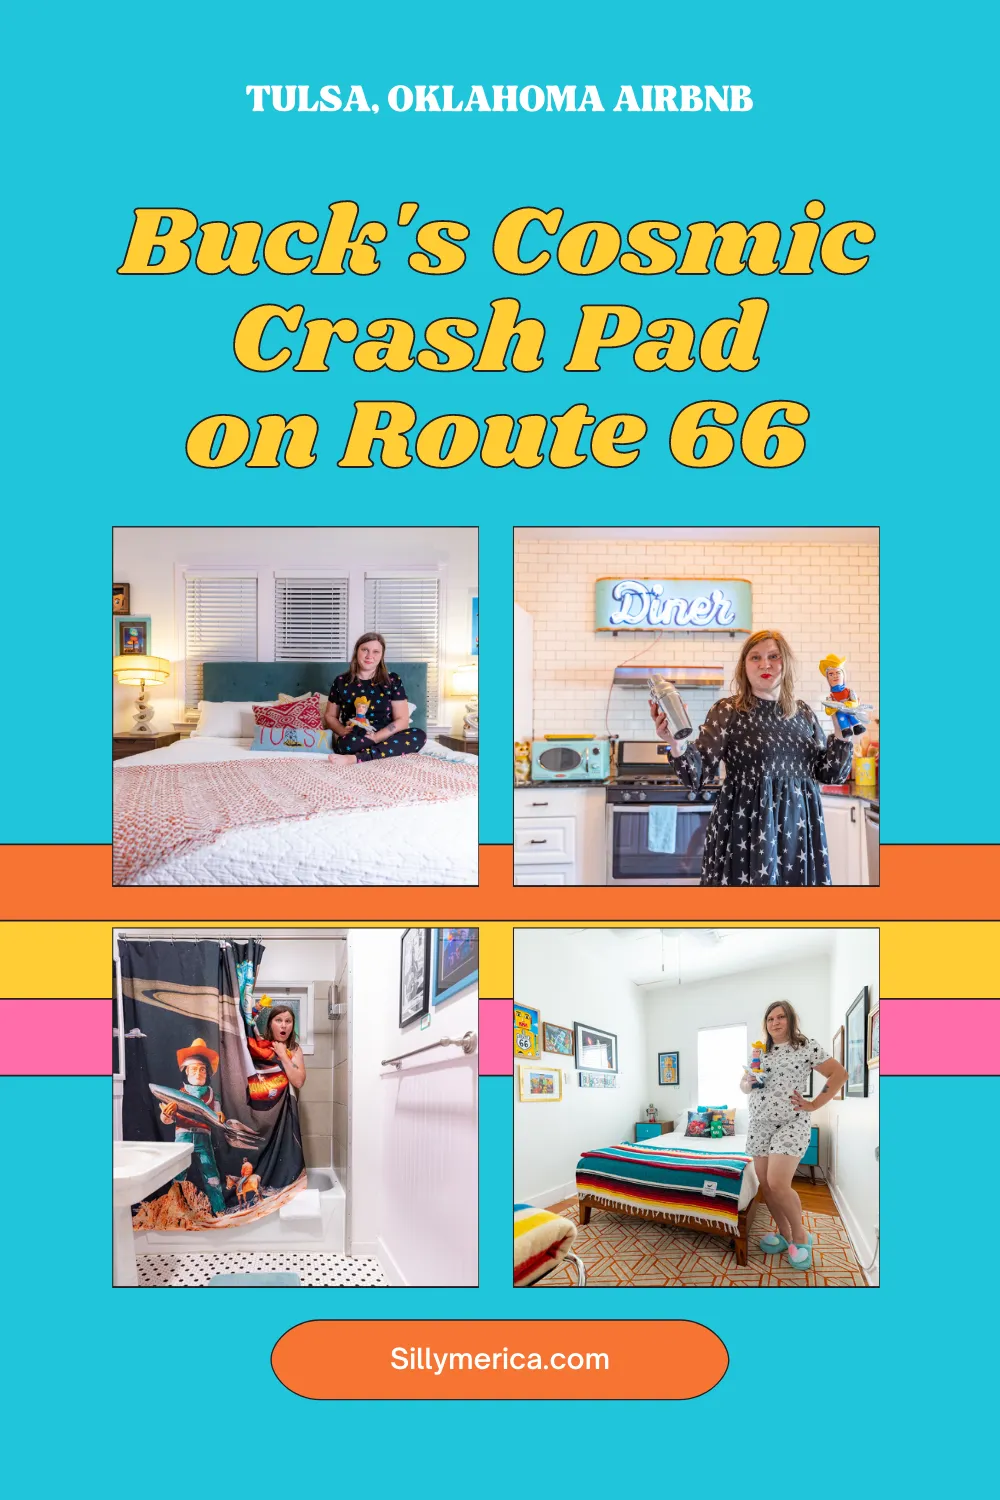 Are you looking for a unique place to stay on Route 66? The answer might just be written in the stars. Or, at least in Tulsa, Oklahoma. A stay at Buck's Cosmic Crash Pad on Route 66 will leave you feeling over the moon. This Tulsa, Oklahoma AirBNB is a must stay on a Route 66 road trip.  #RoadTrips #RoadTripStop #Route66 #Route66RoadTrip #OklahomaRoute66 #Oklahoma #OklahomaRoadTrip #OklahomaRoadsideAttractions #RoadsideAttractions #RoadsideAttraction #RoadsideAmerica #RoadTrip #TulsaAirbnb